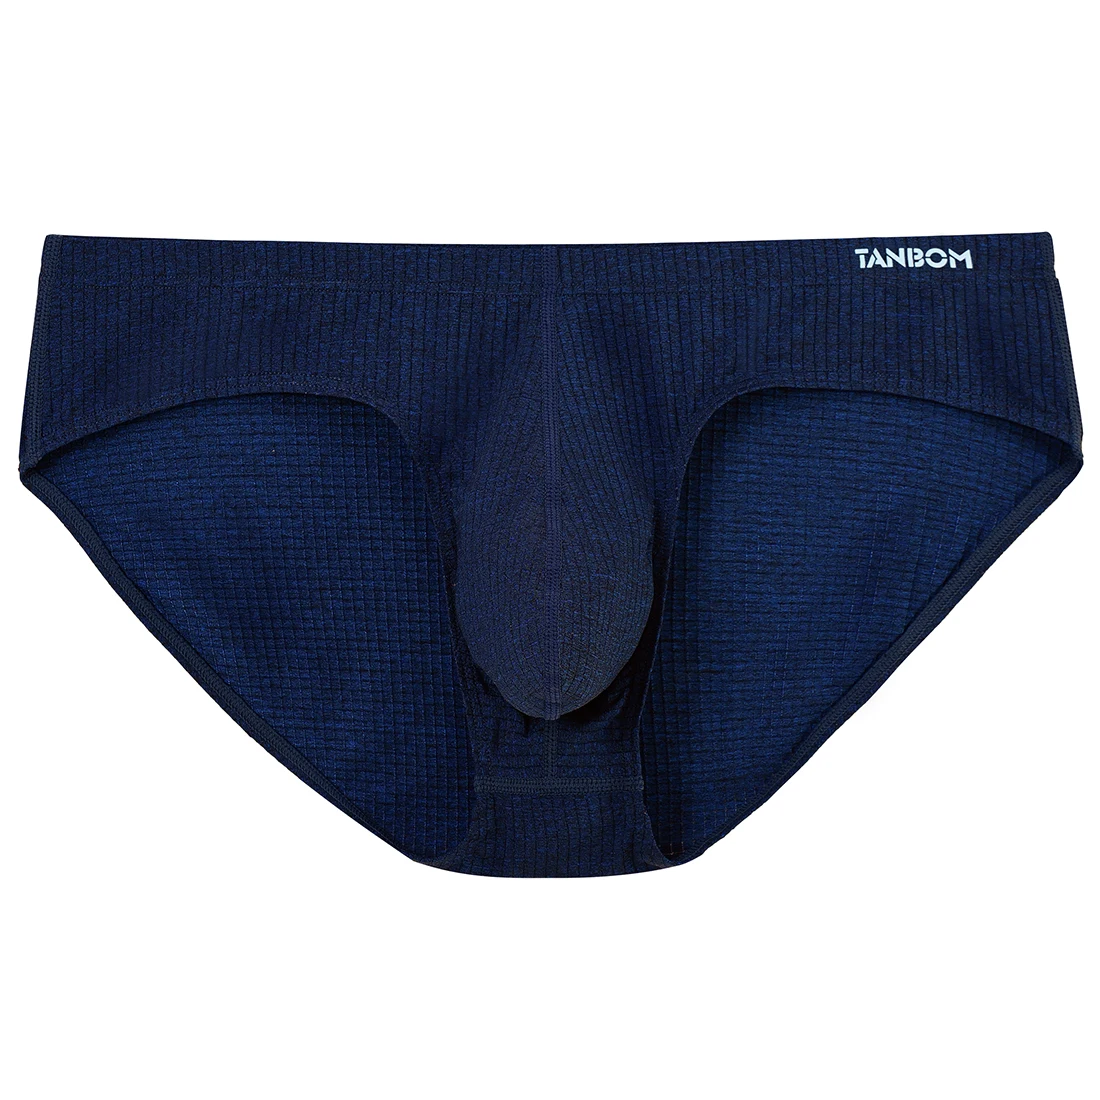 Breathable Seamless Men's Boxer Modal Underwear Free Longer Letter Printing  Cotton Underpants 3d Pouch Shorts Male Panties Tanga